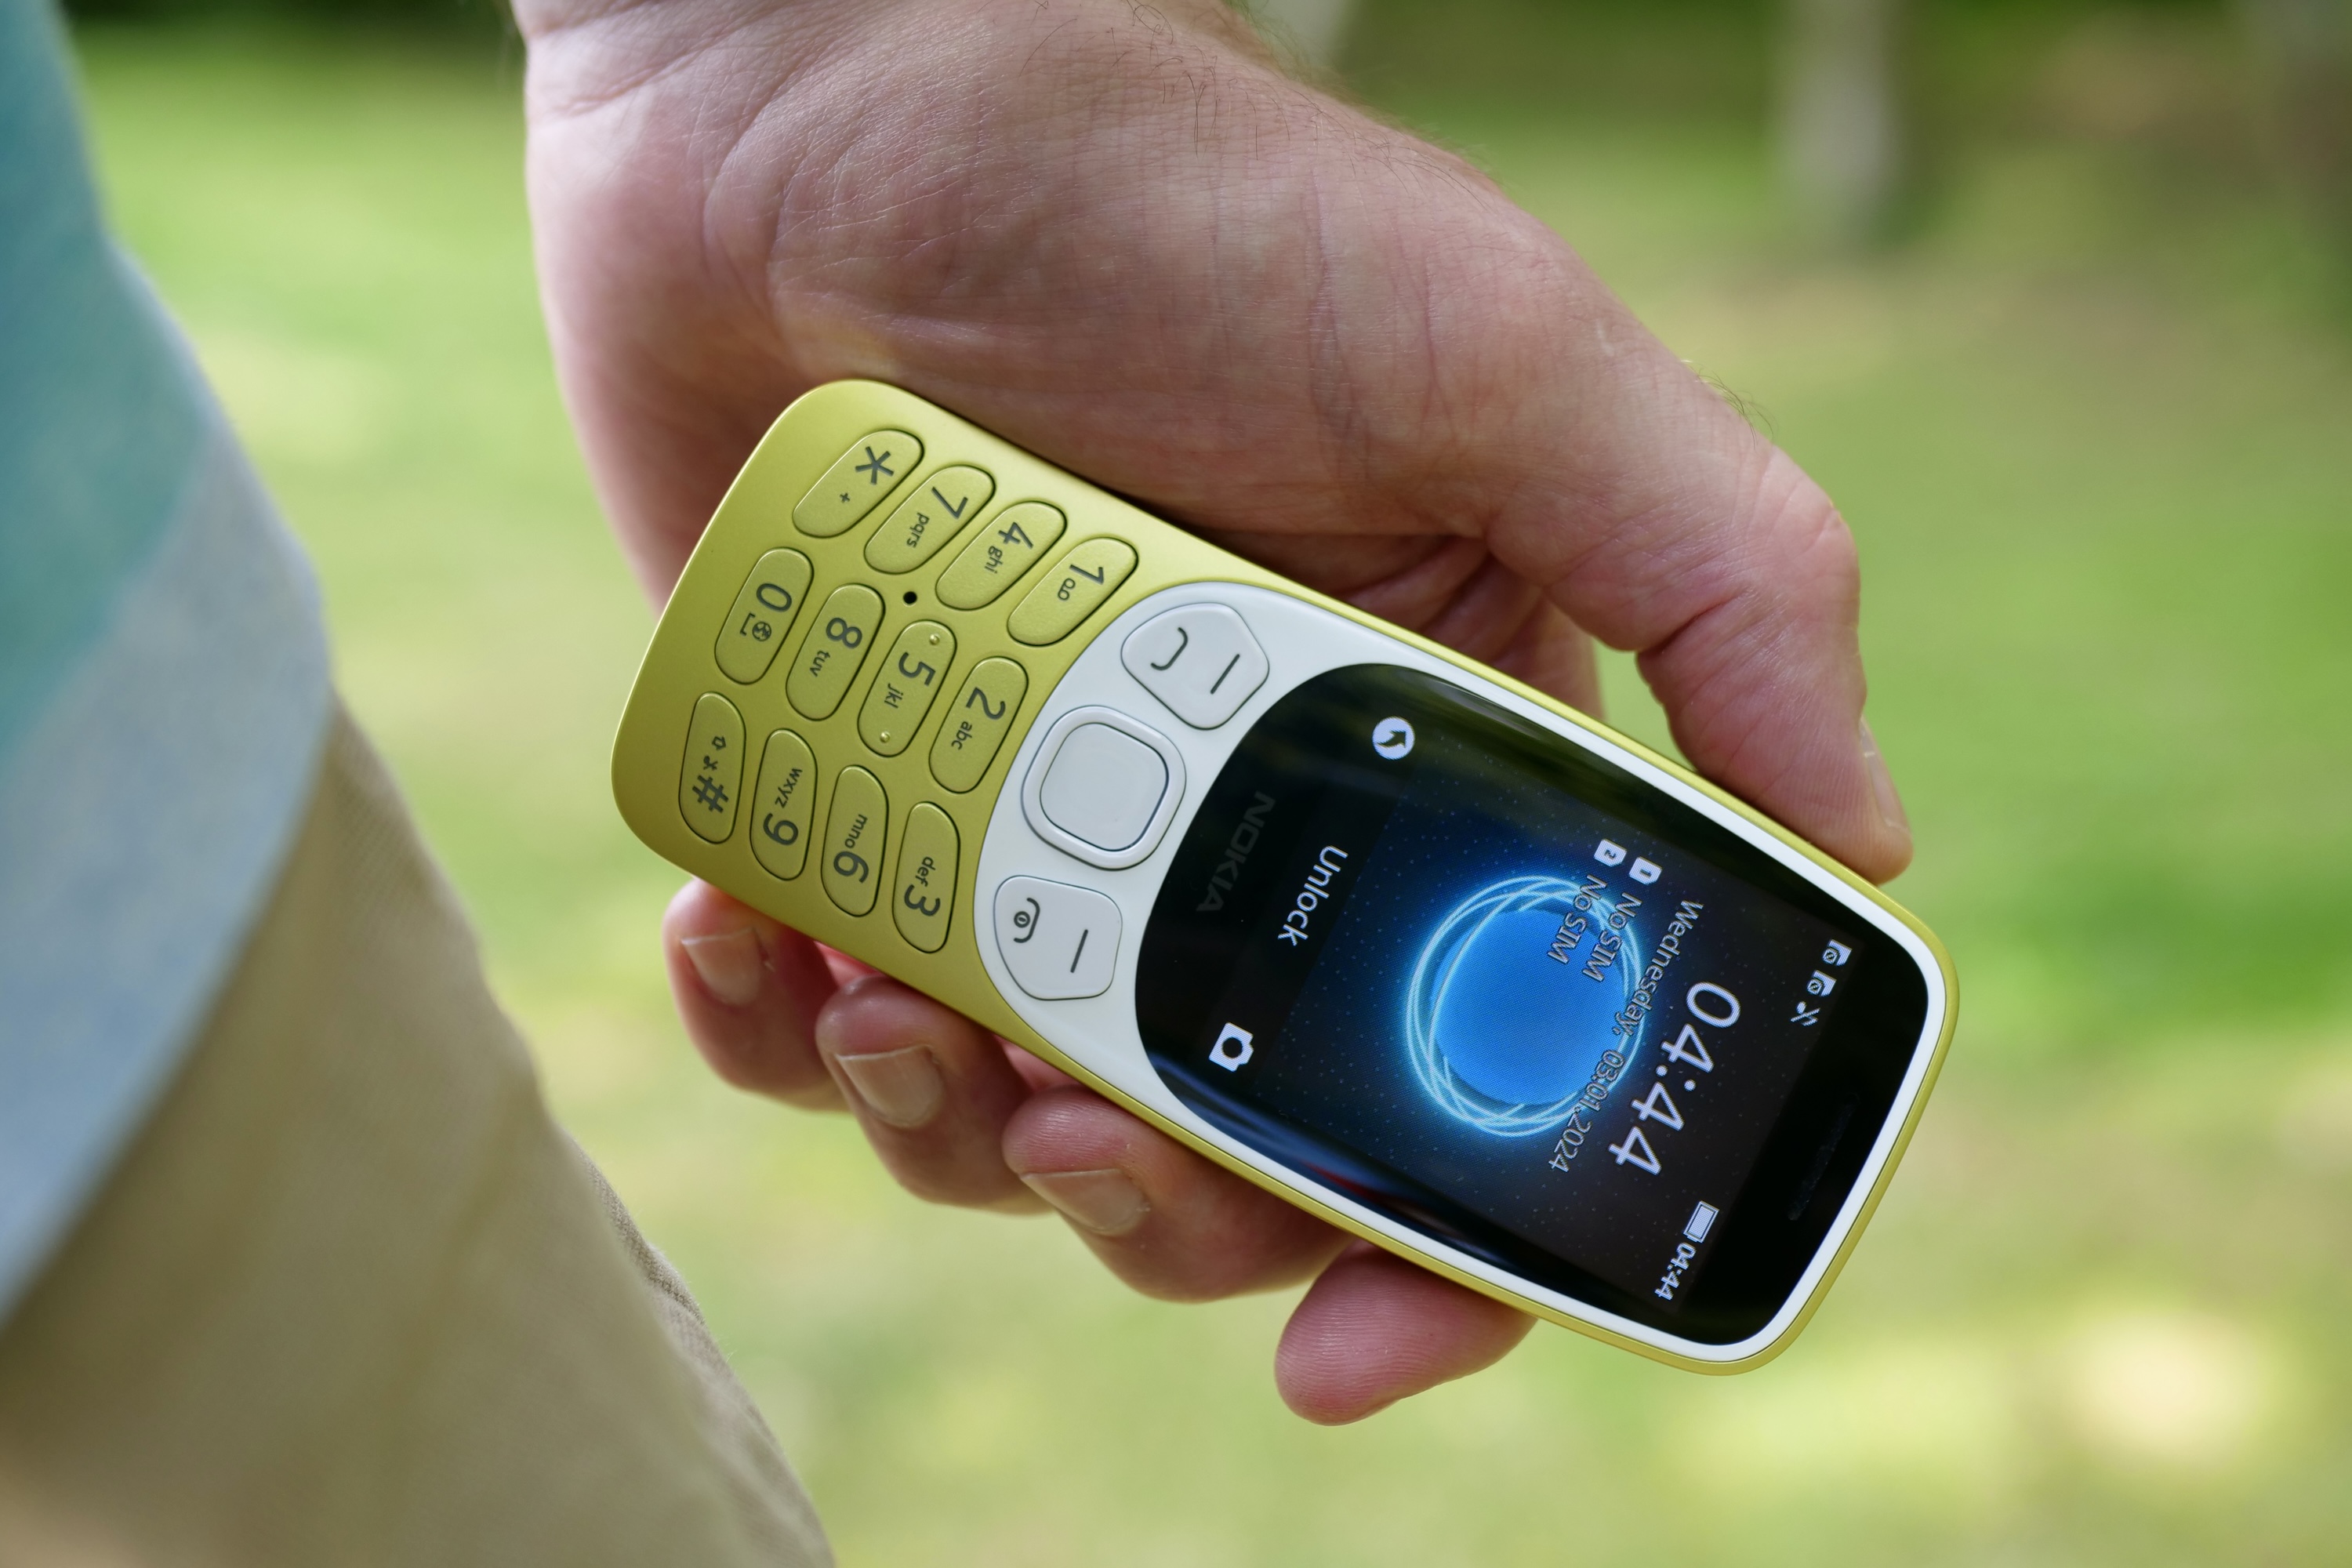 A person holding the Nokia 3210, showing the screen.